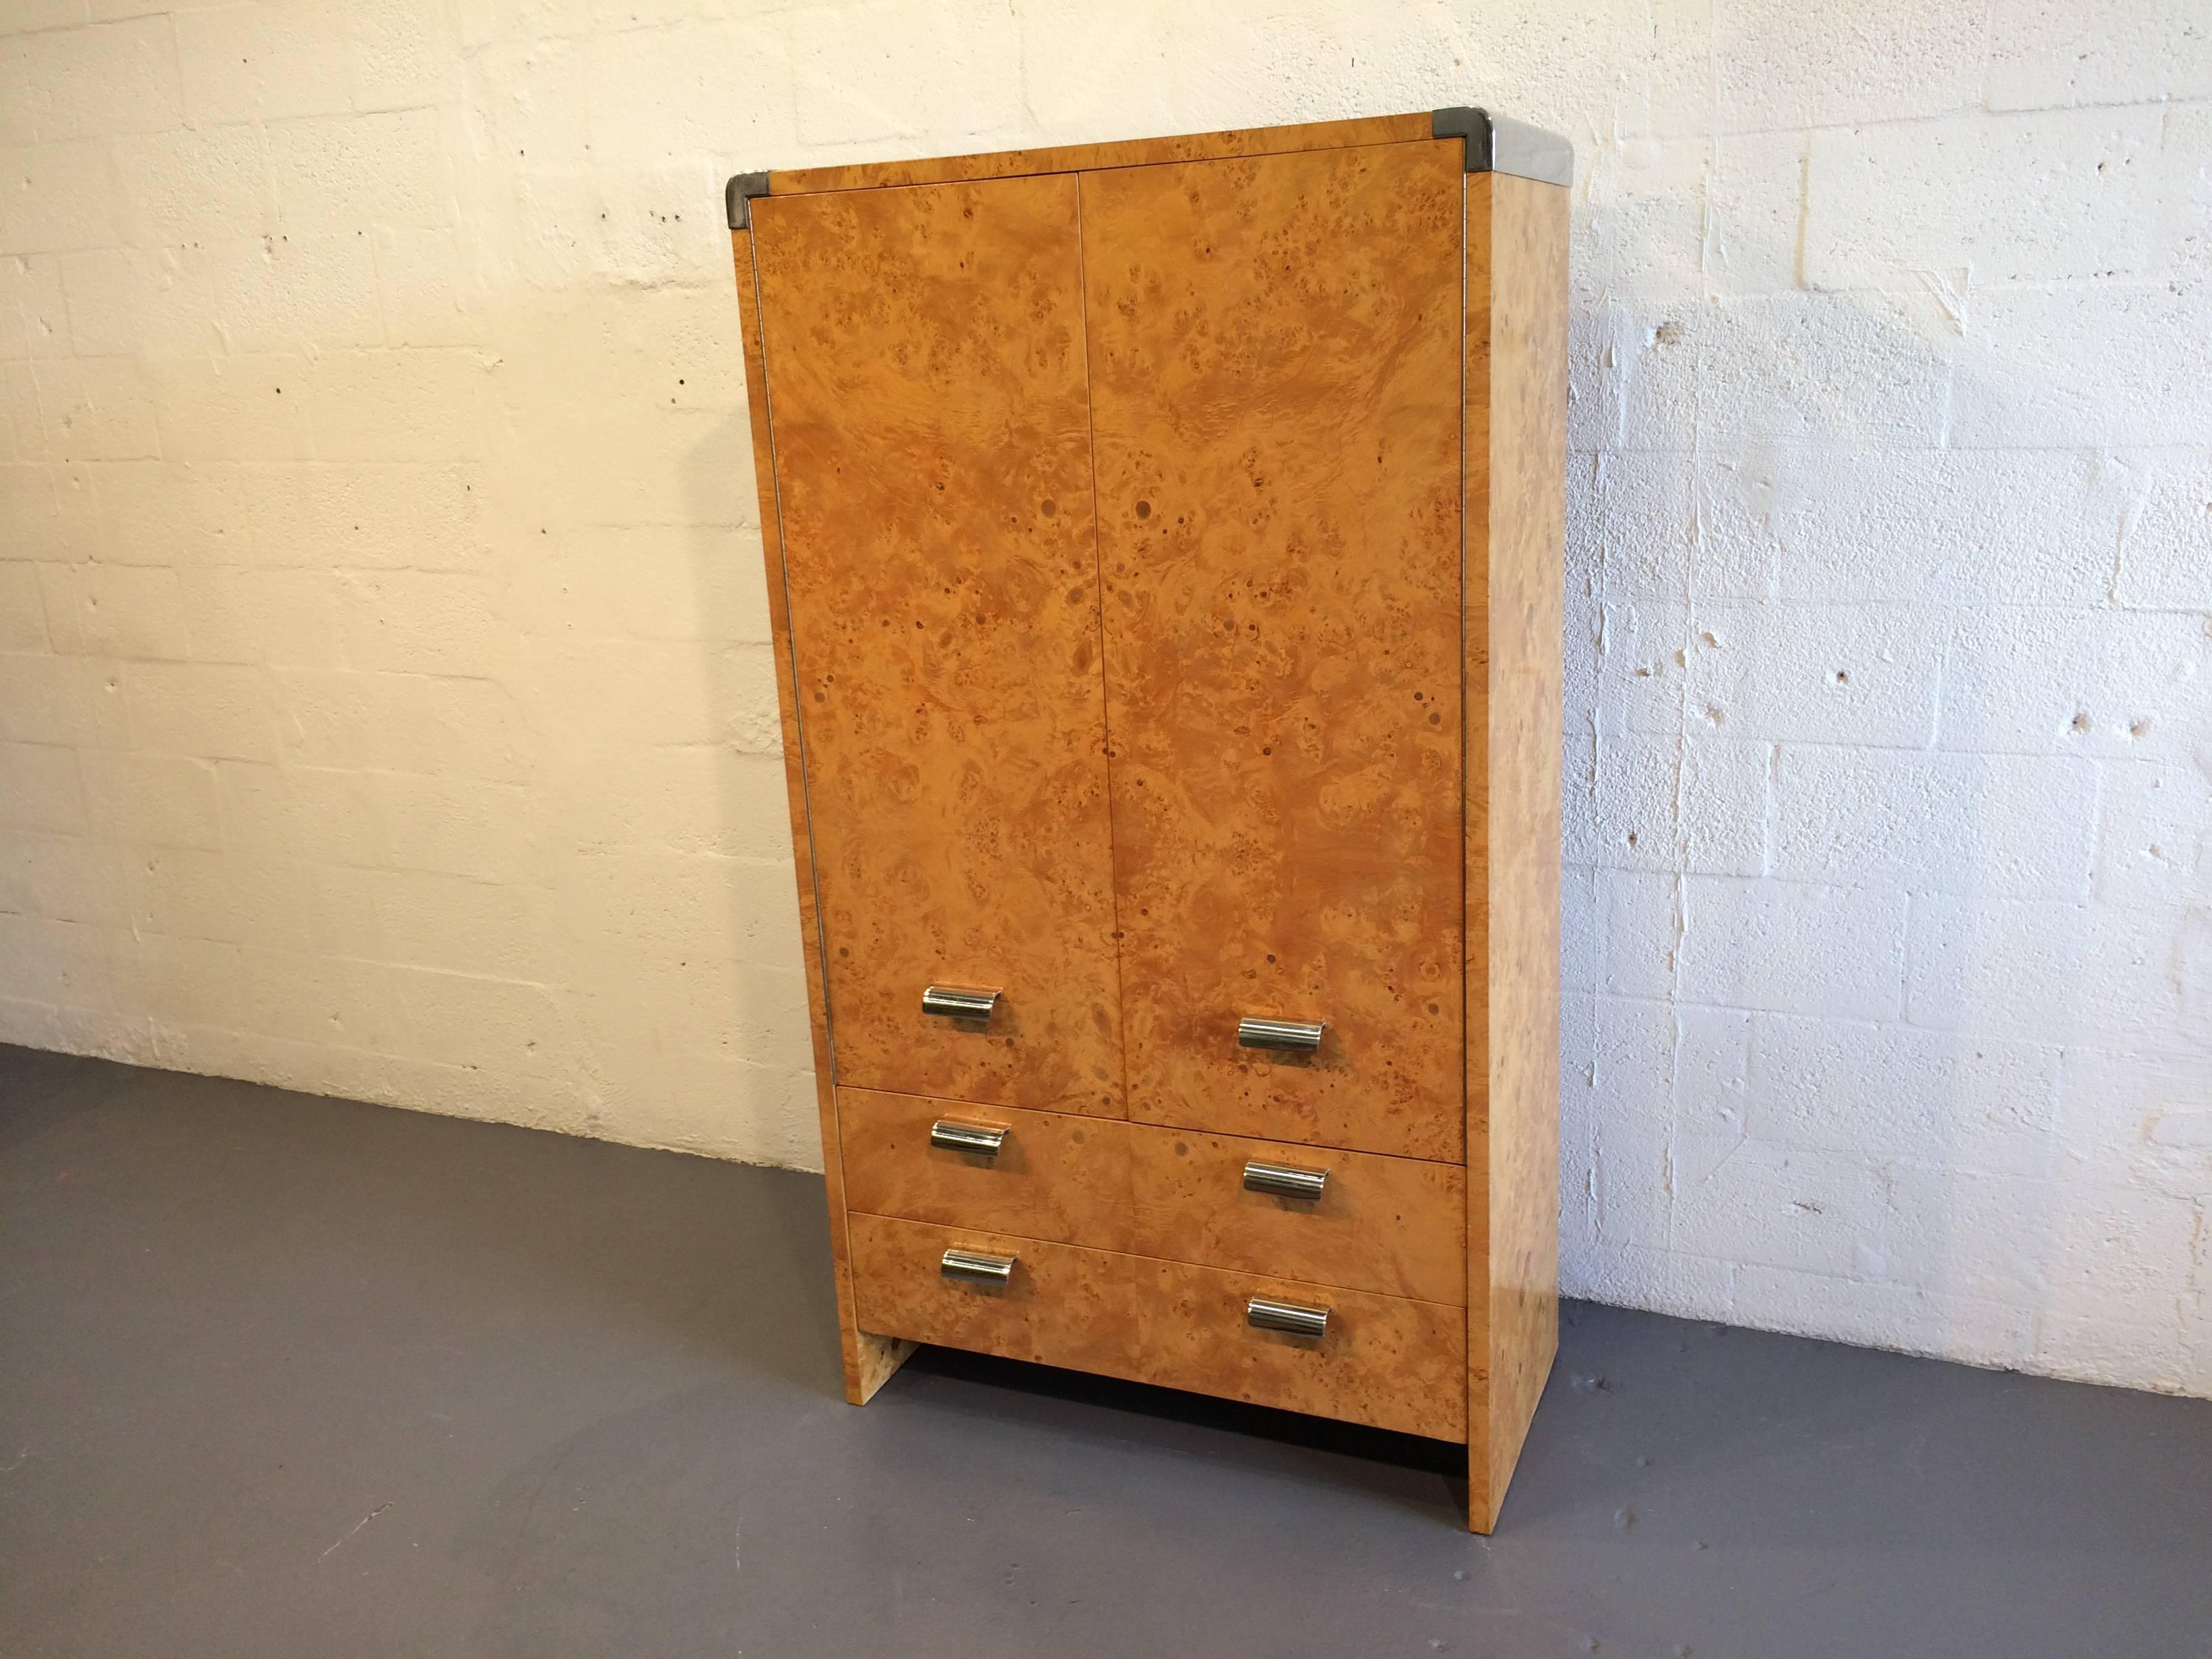 Burl and stainless steel tall dresser. Two doors and two drawers. Behind the doors are two shelves and three drawers.